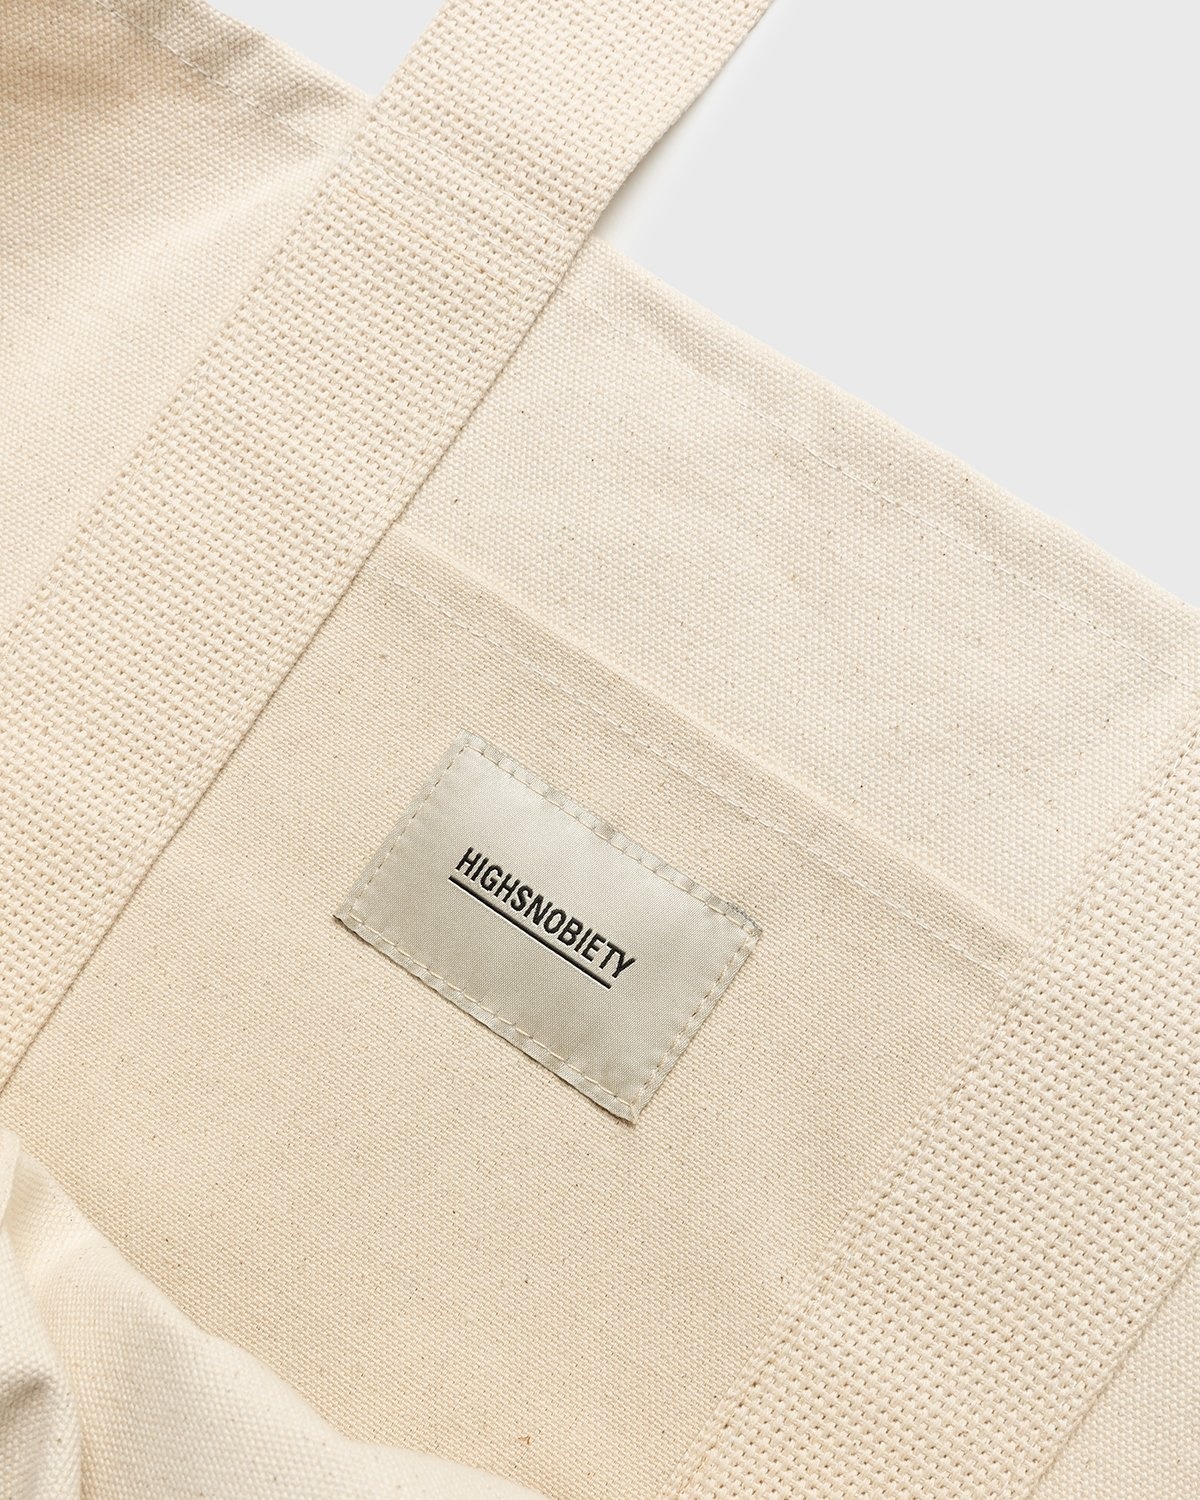 Highsnobiety – XL Canvas "H" Tote Natural - Bags - Beige - Image 5